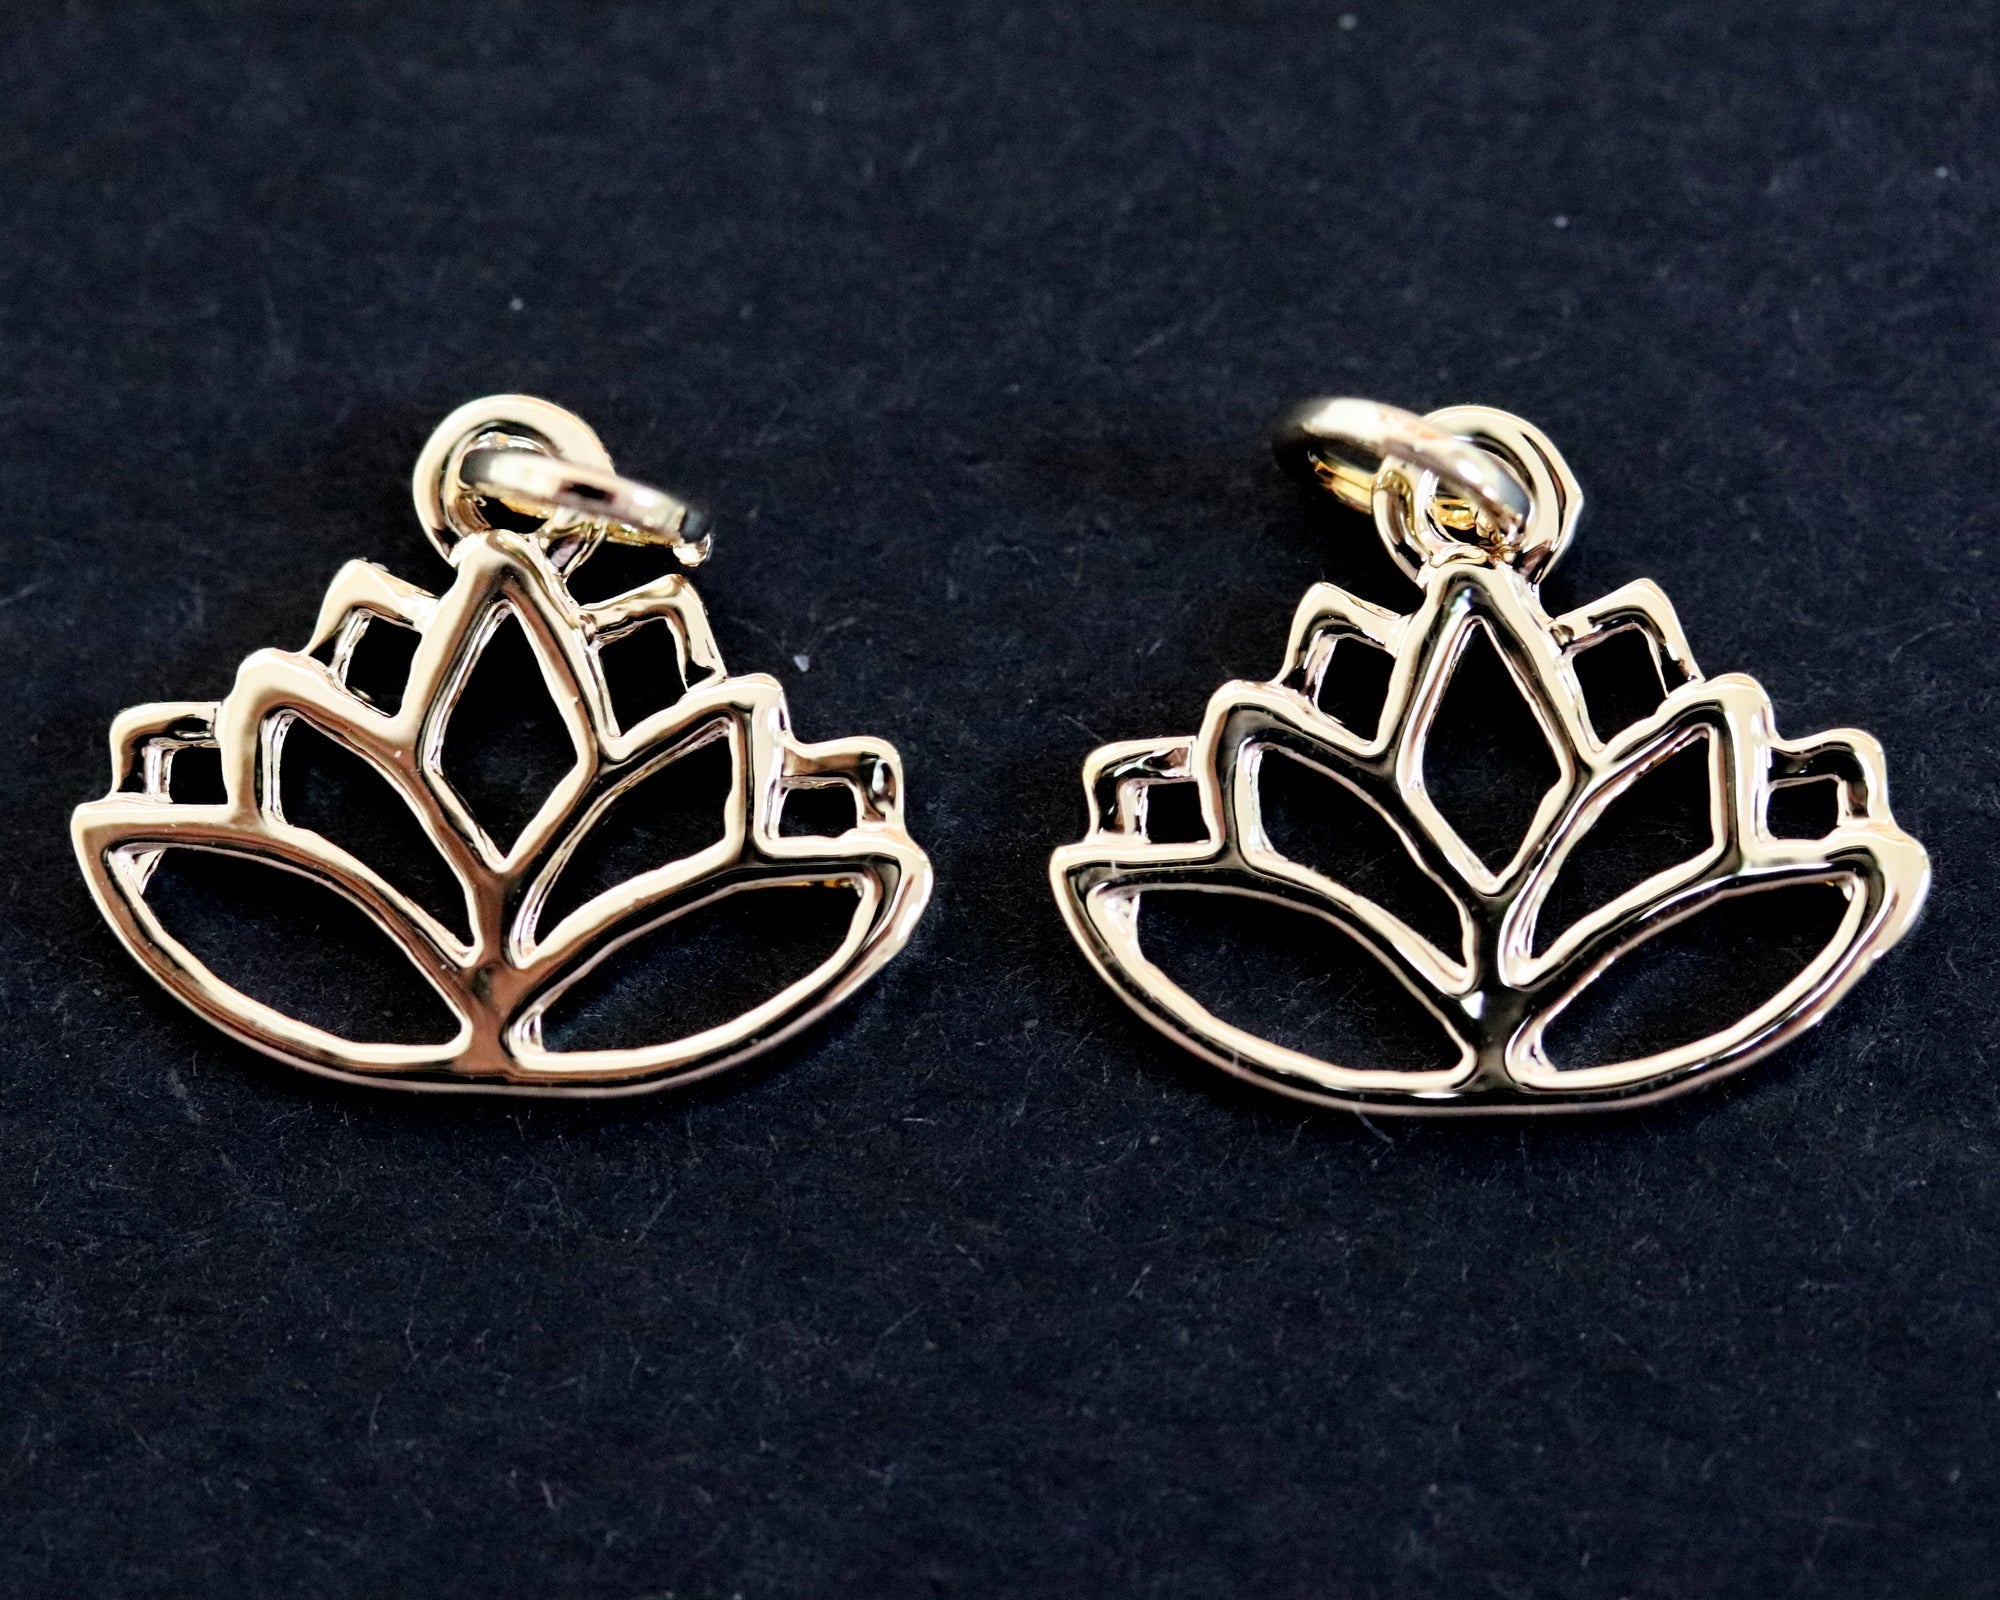 Lotus charm 14x16mm 14K Gold plated metal alloy pendant